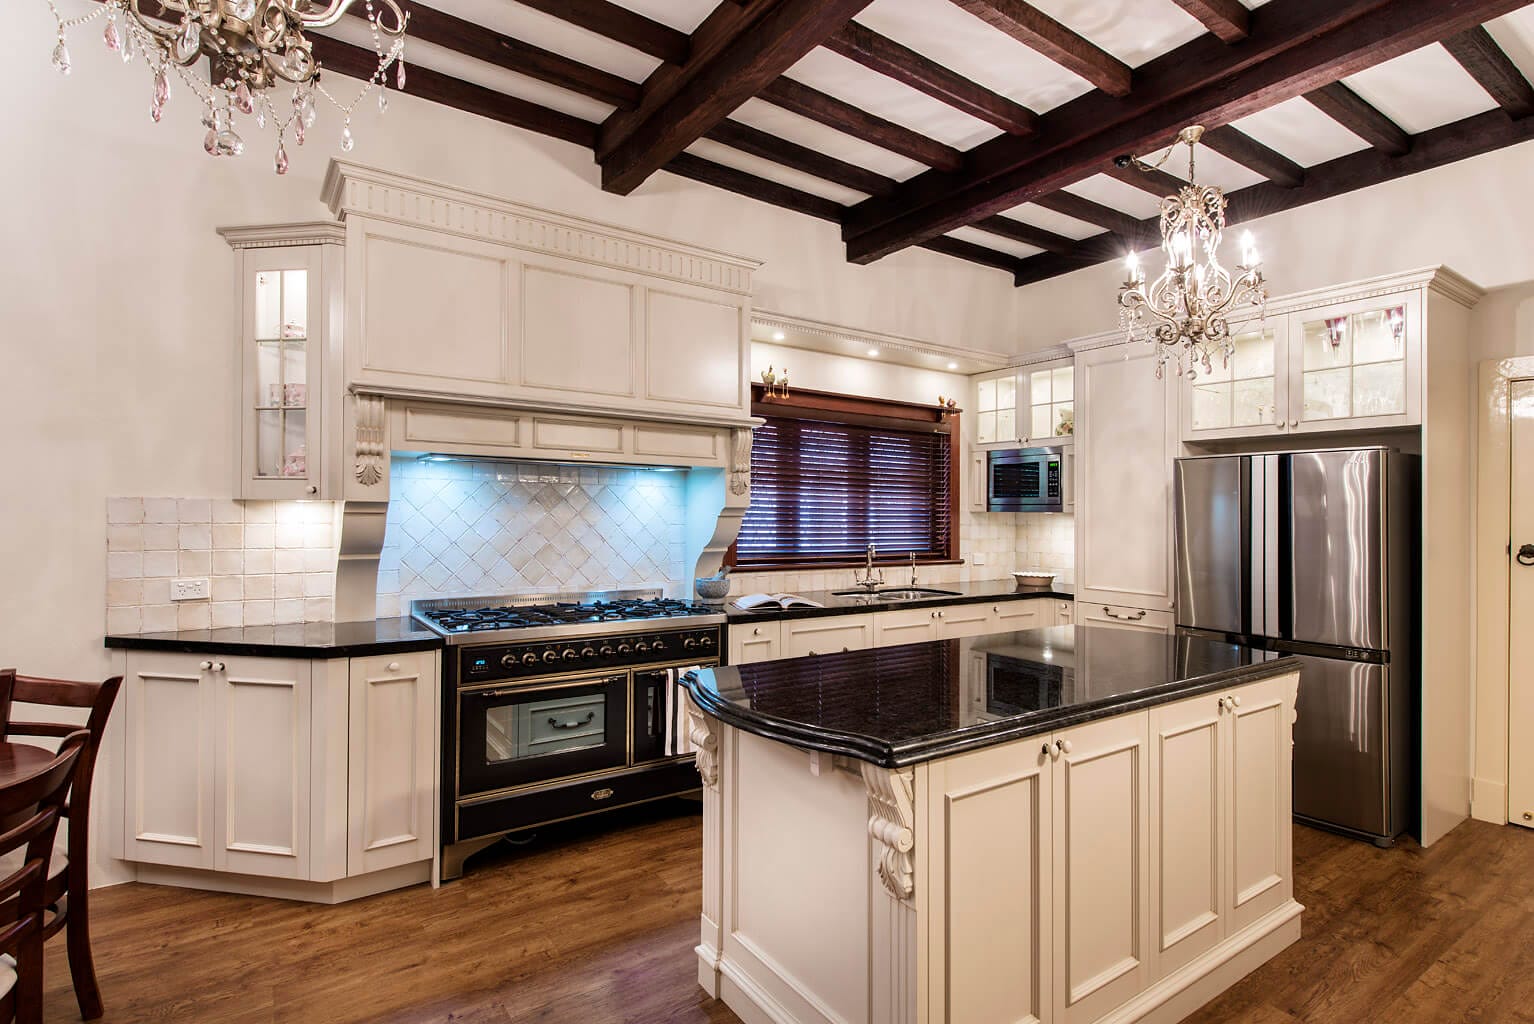 Unique Features To Your Classic Style Kitchen